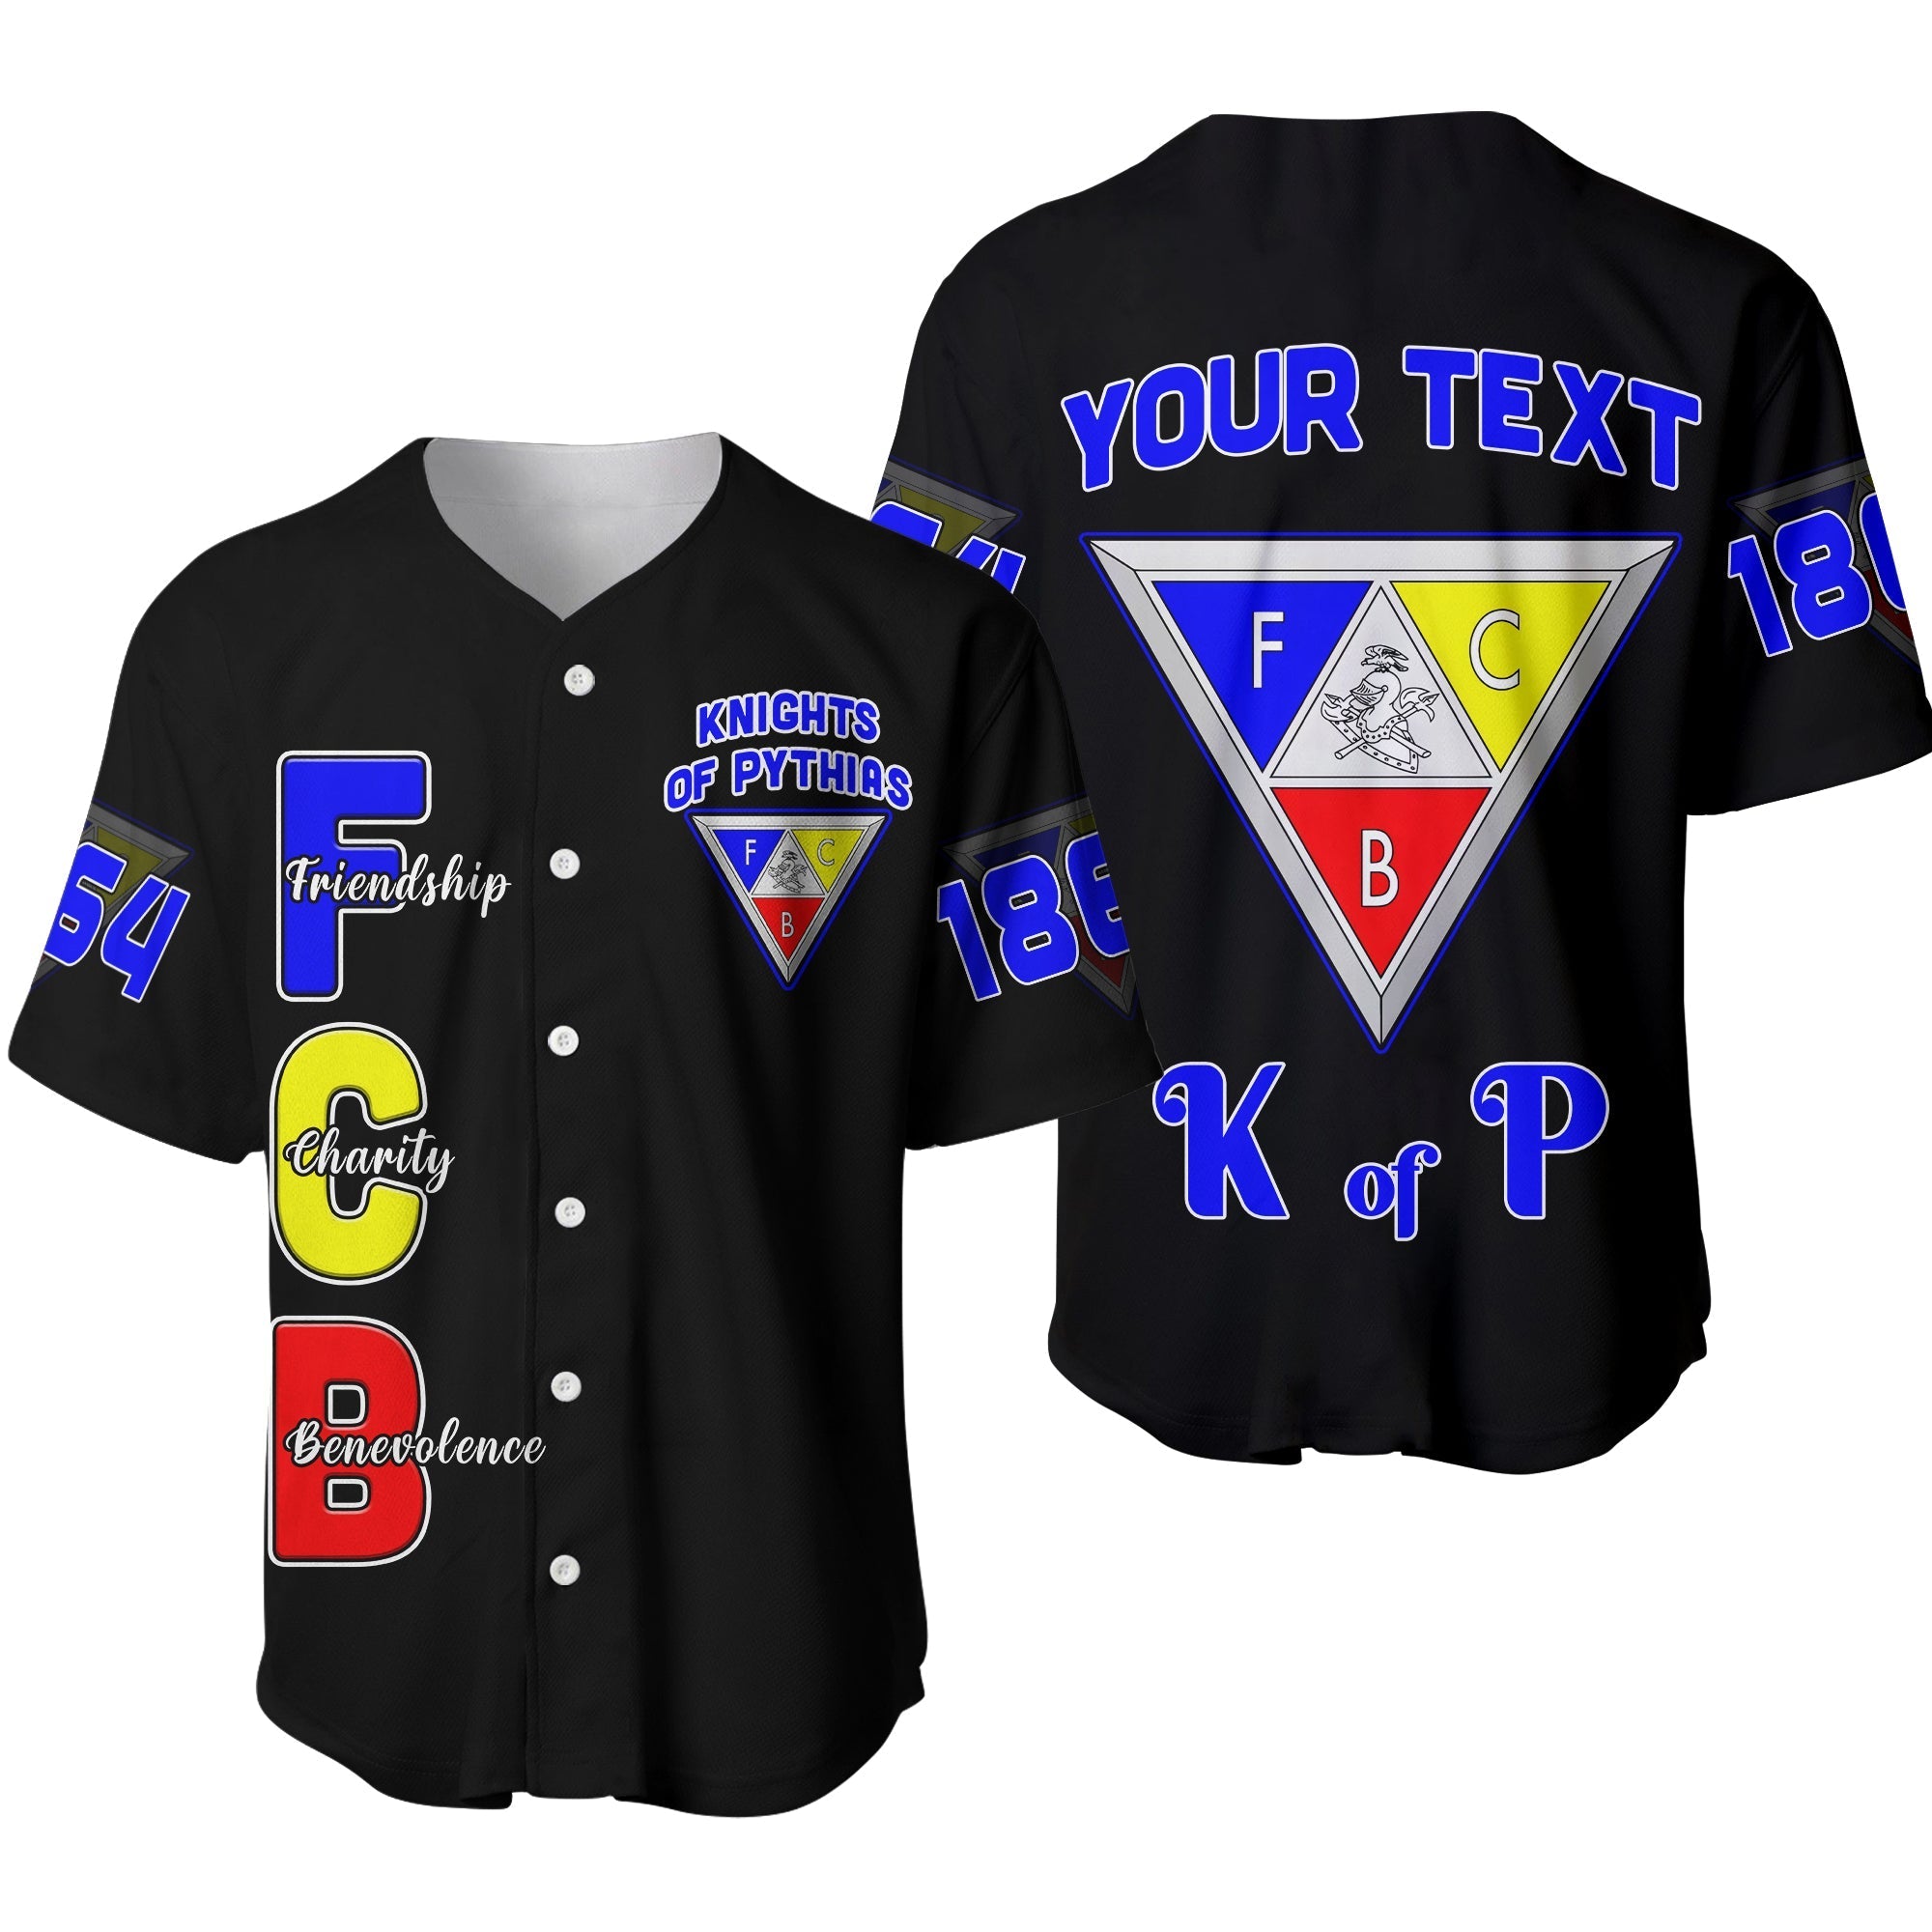 custom-personalise-knights-of-pythias-baseball-jersey-since-1864-simple-style-ver01